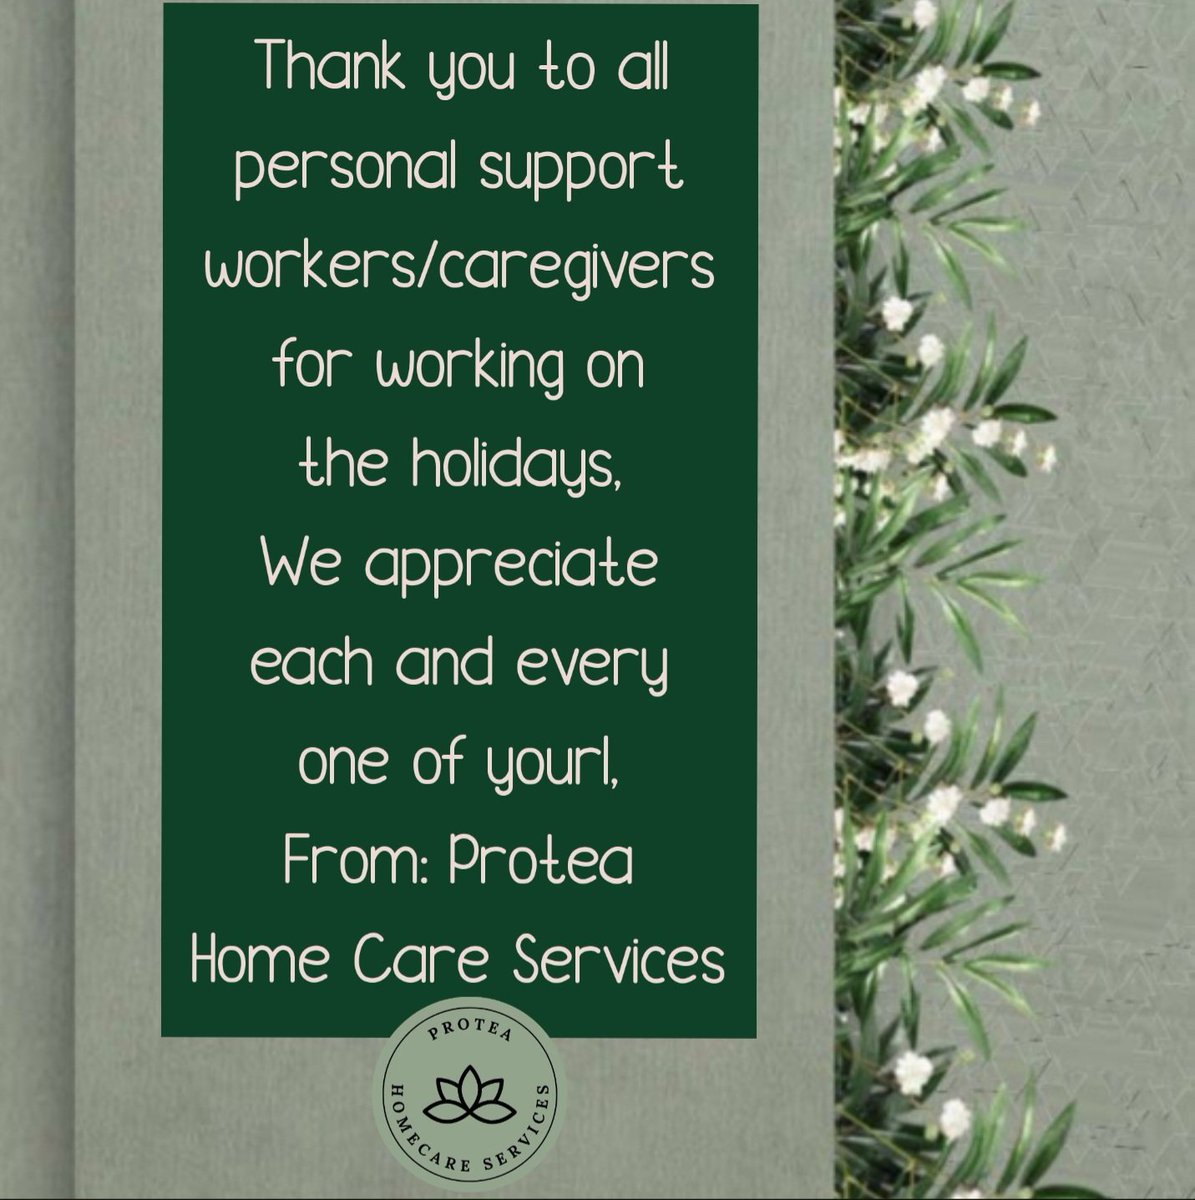 Thank you to everyone that sacrificed their time with their loved ones over the holidays!
Call/WhatsApp:+1 905 773 9893
Email:Proteahcs@gmail.com 
Instagram:@proteahomecareservices
Facebook:Protea Homecare Services
#PSW2022
#mississaugajobs
#mississaugaemployment 
#caregiverjobs